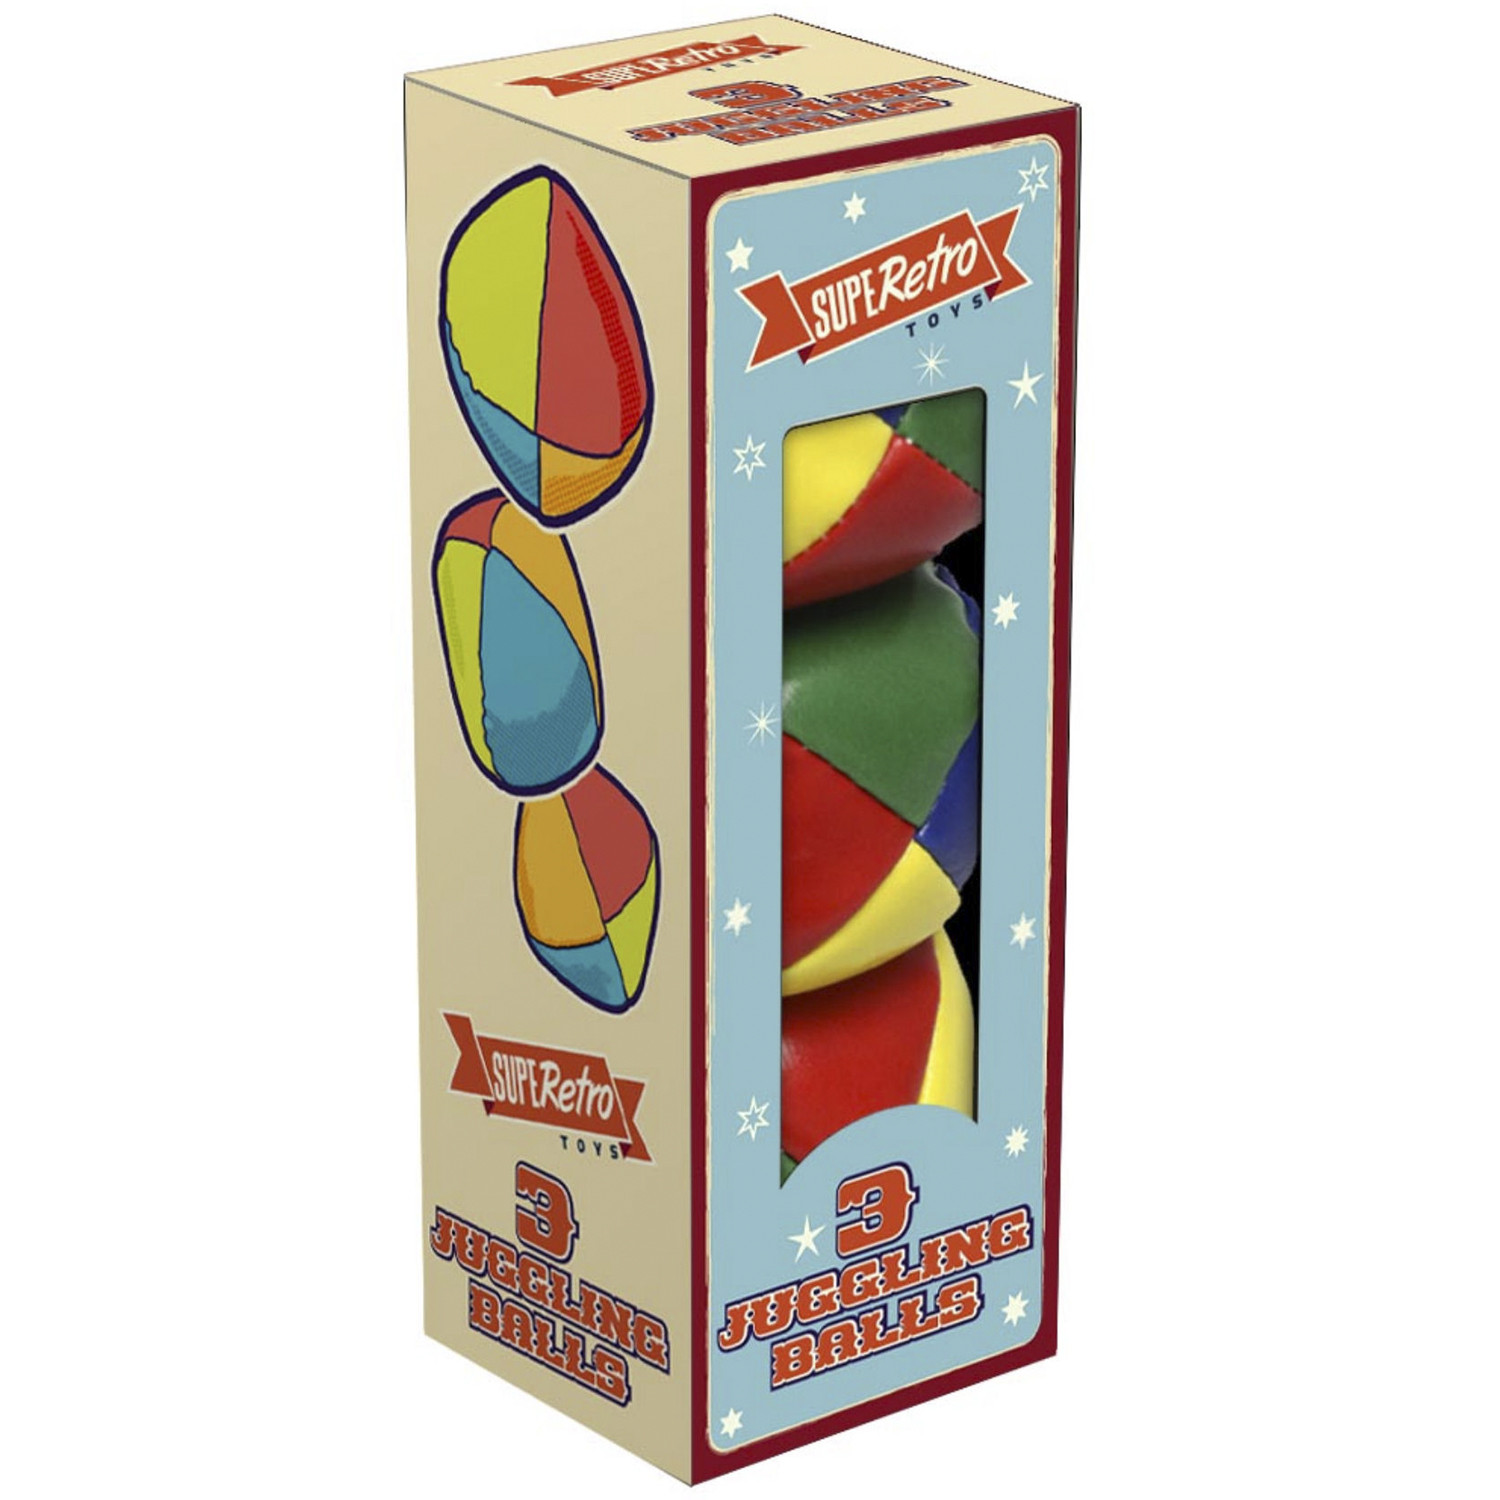 Everyday Super Retro Juggling Ball Toy 3 Pack Image